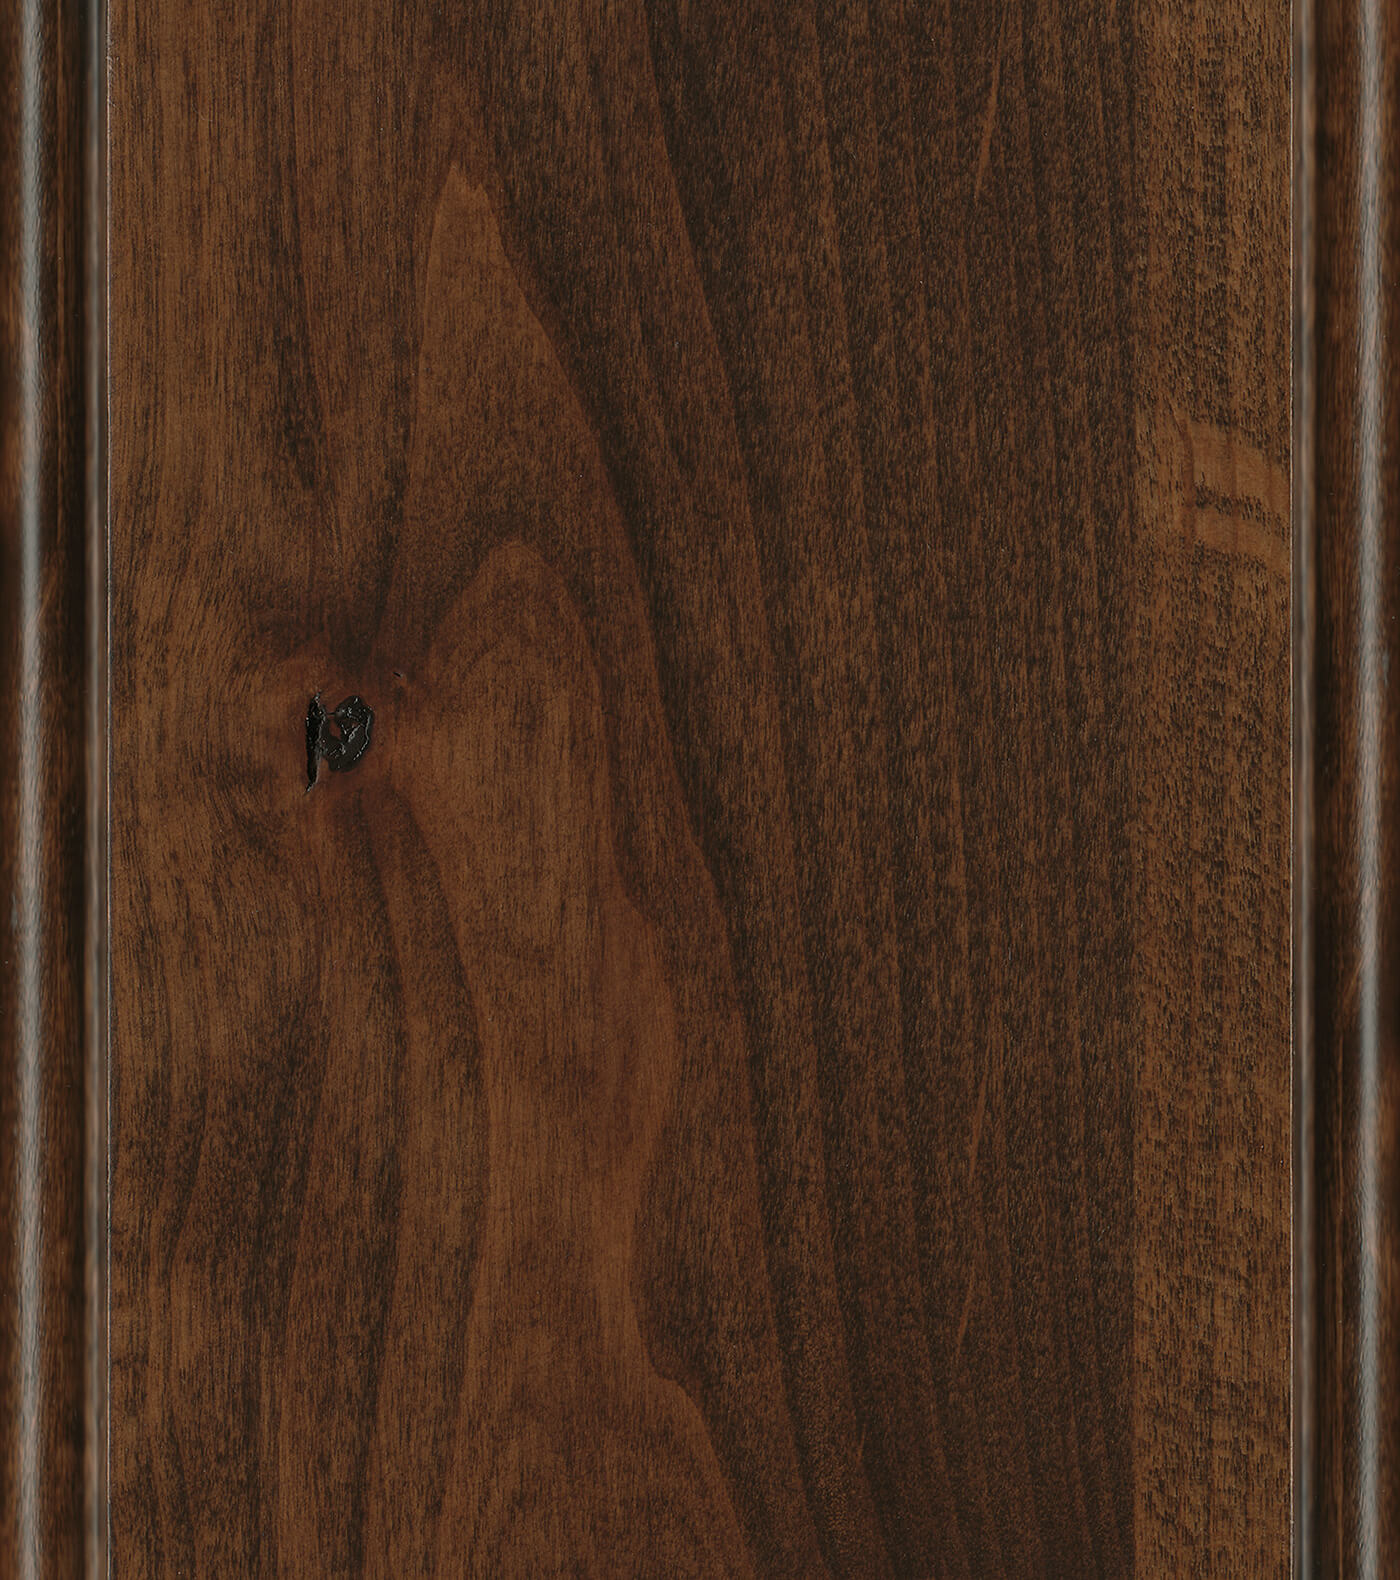 Cappuccino Stain on Knotty Alder